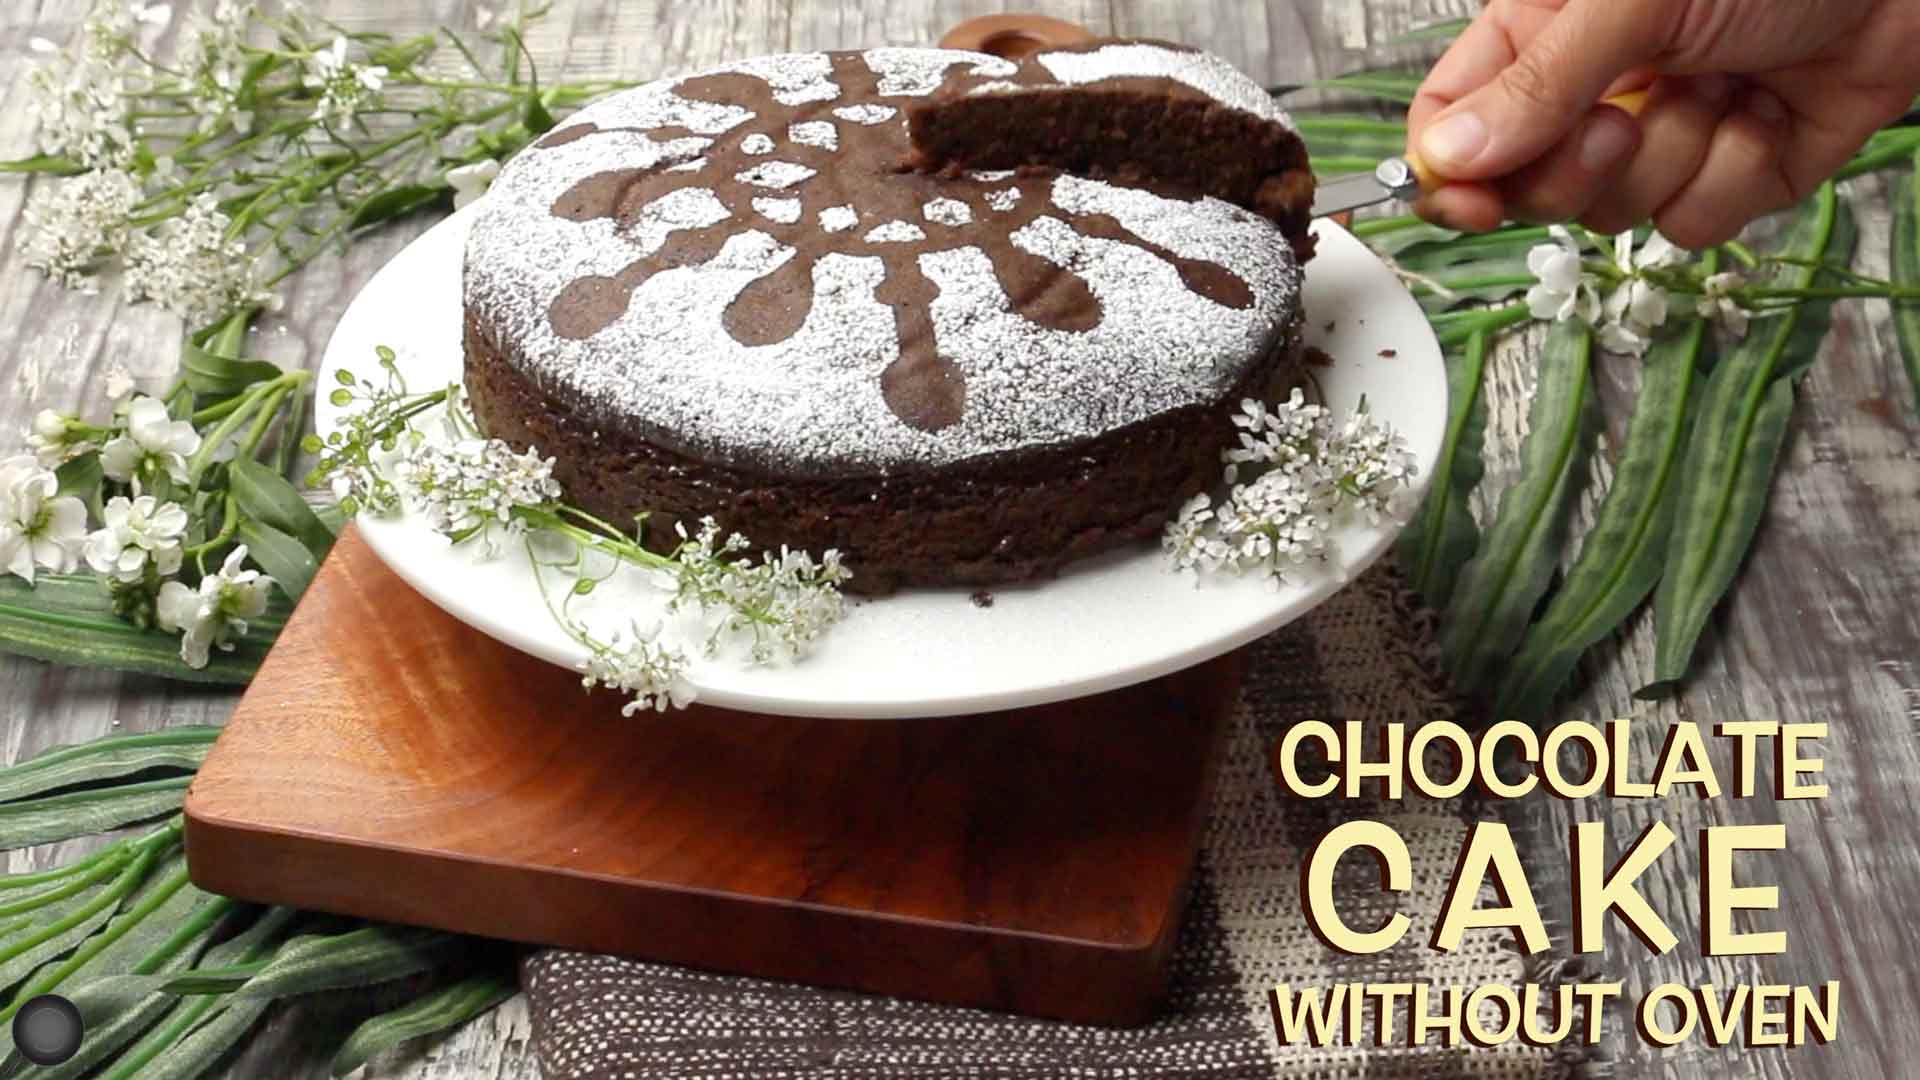 Chocolate Cake without Oven | Easy Steamed Chocolate Cake at Home | Cooker Chocolate Cake